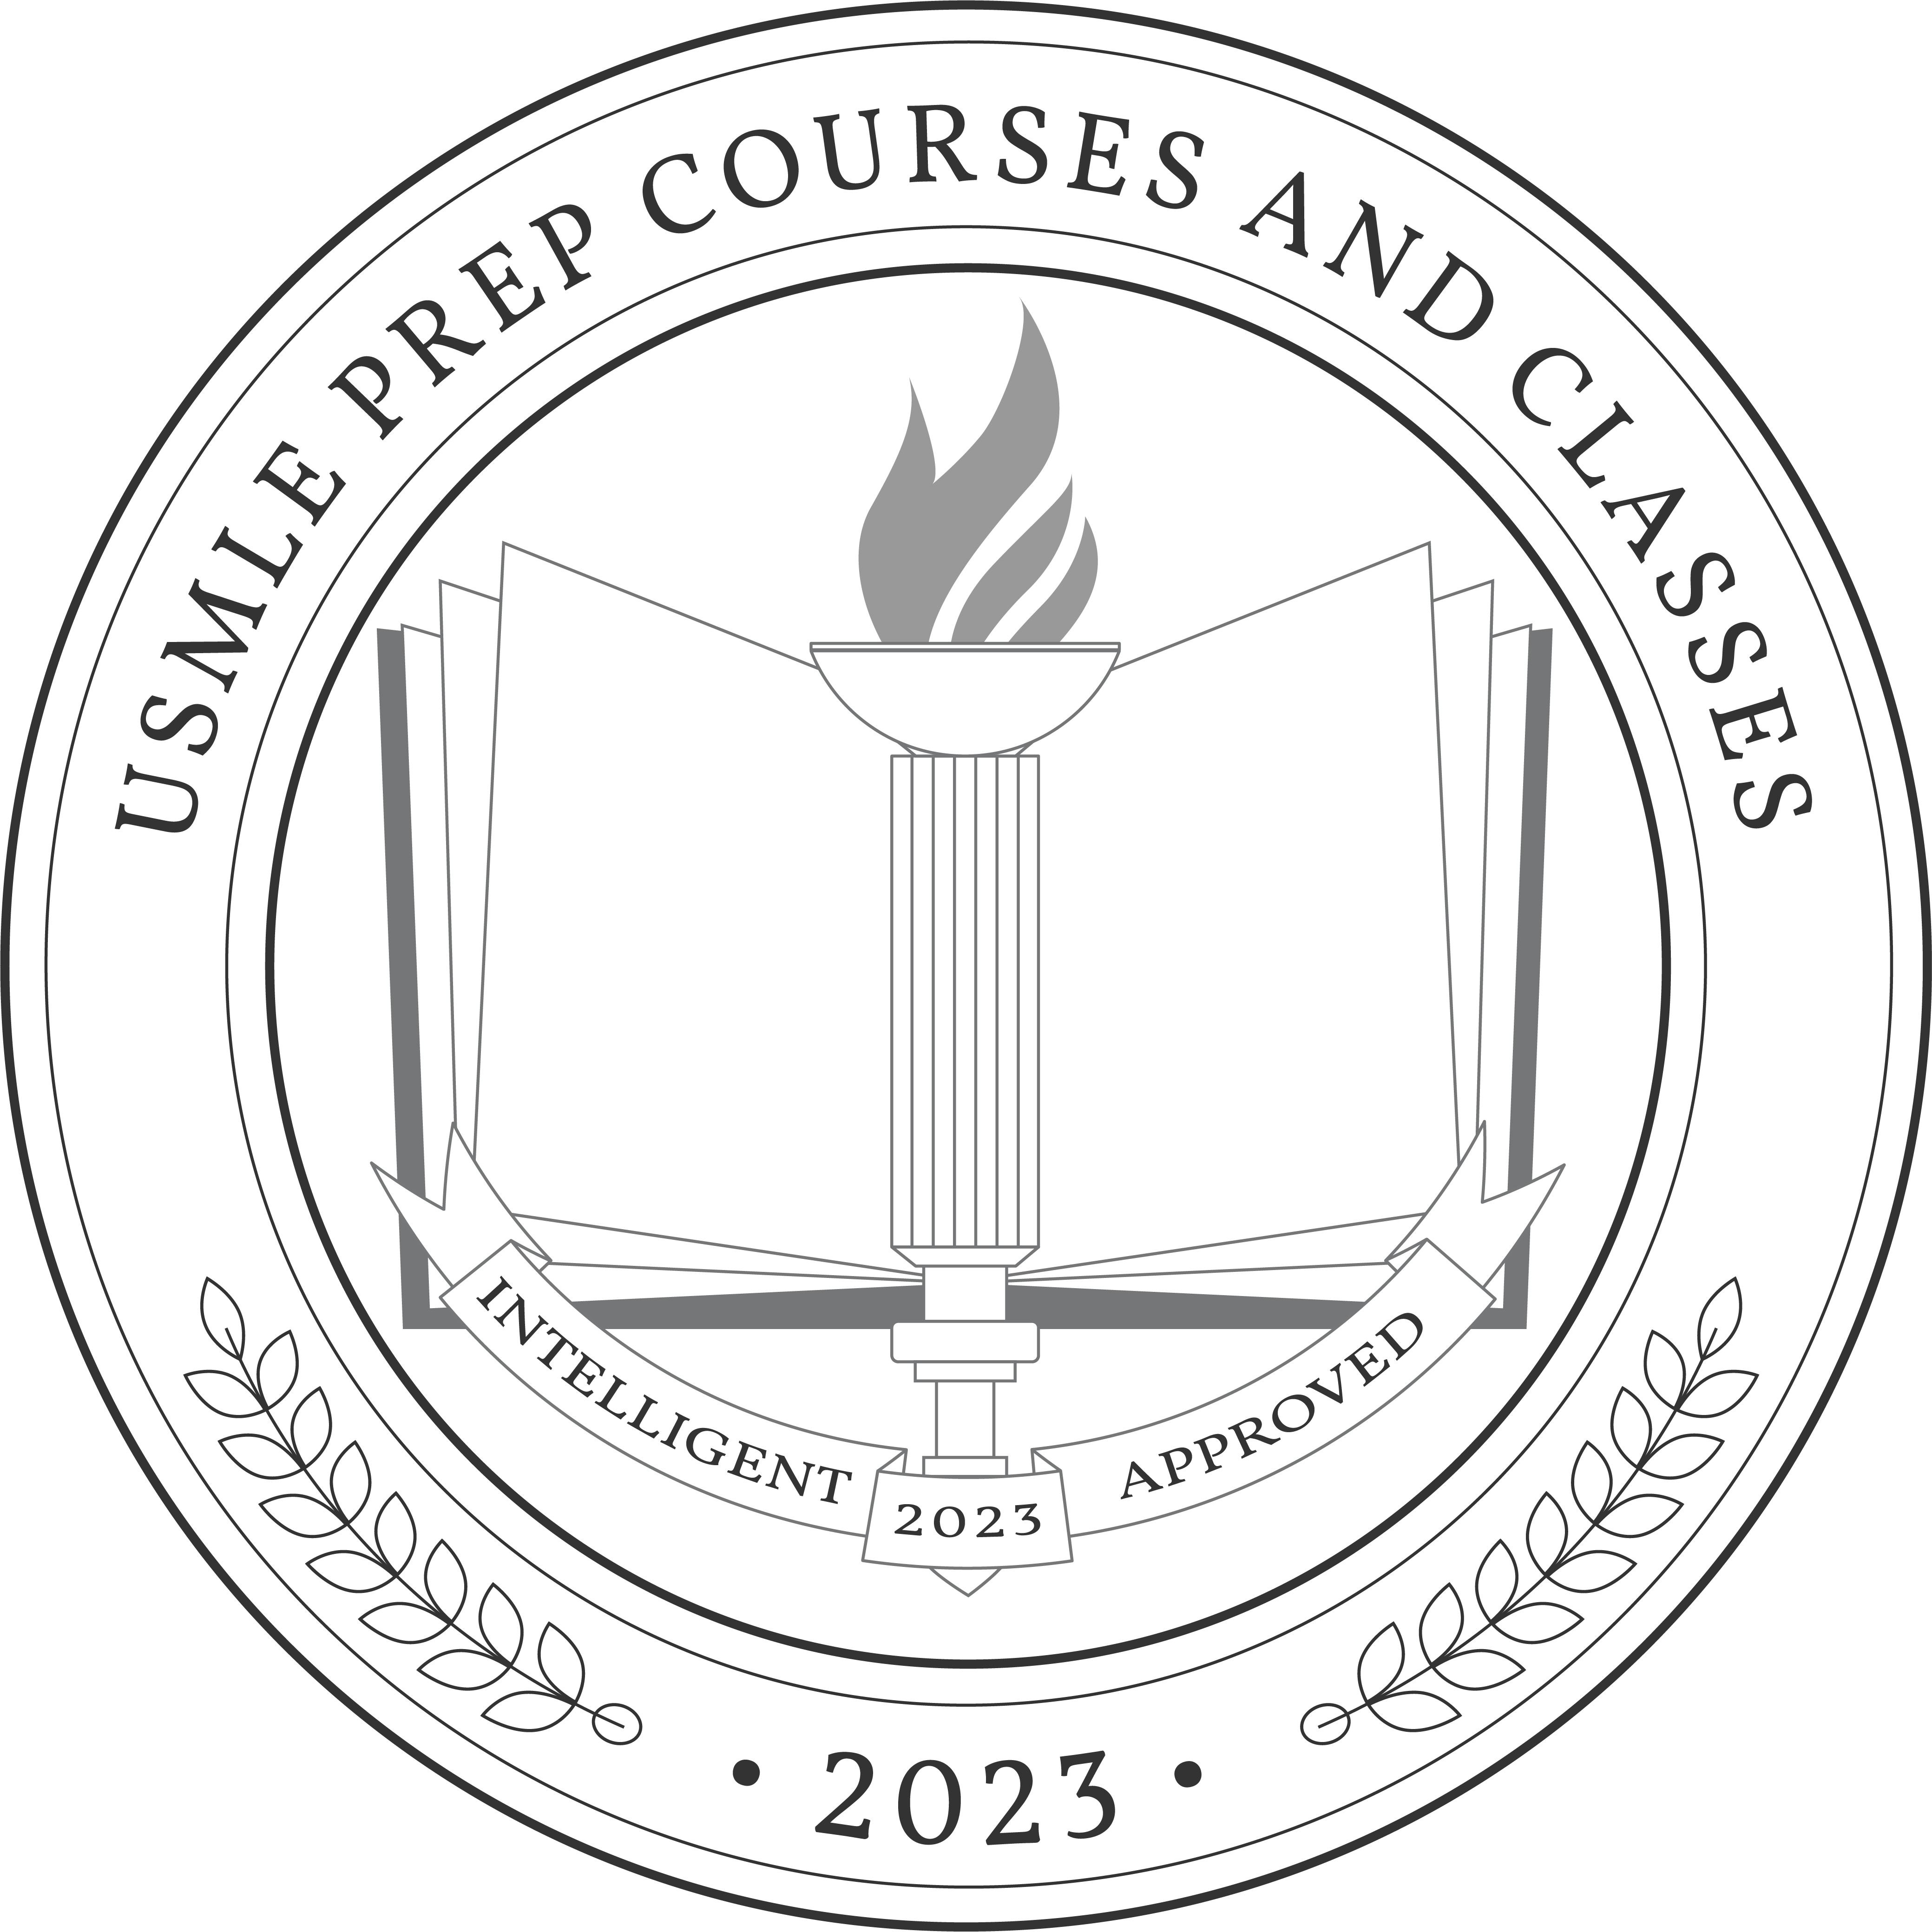 USMLE Prep Courses and Classes Badge